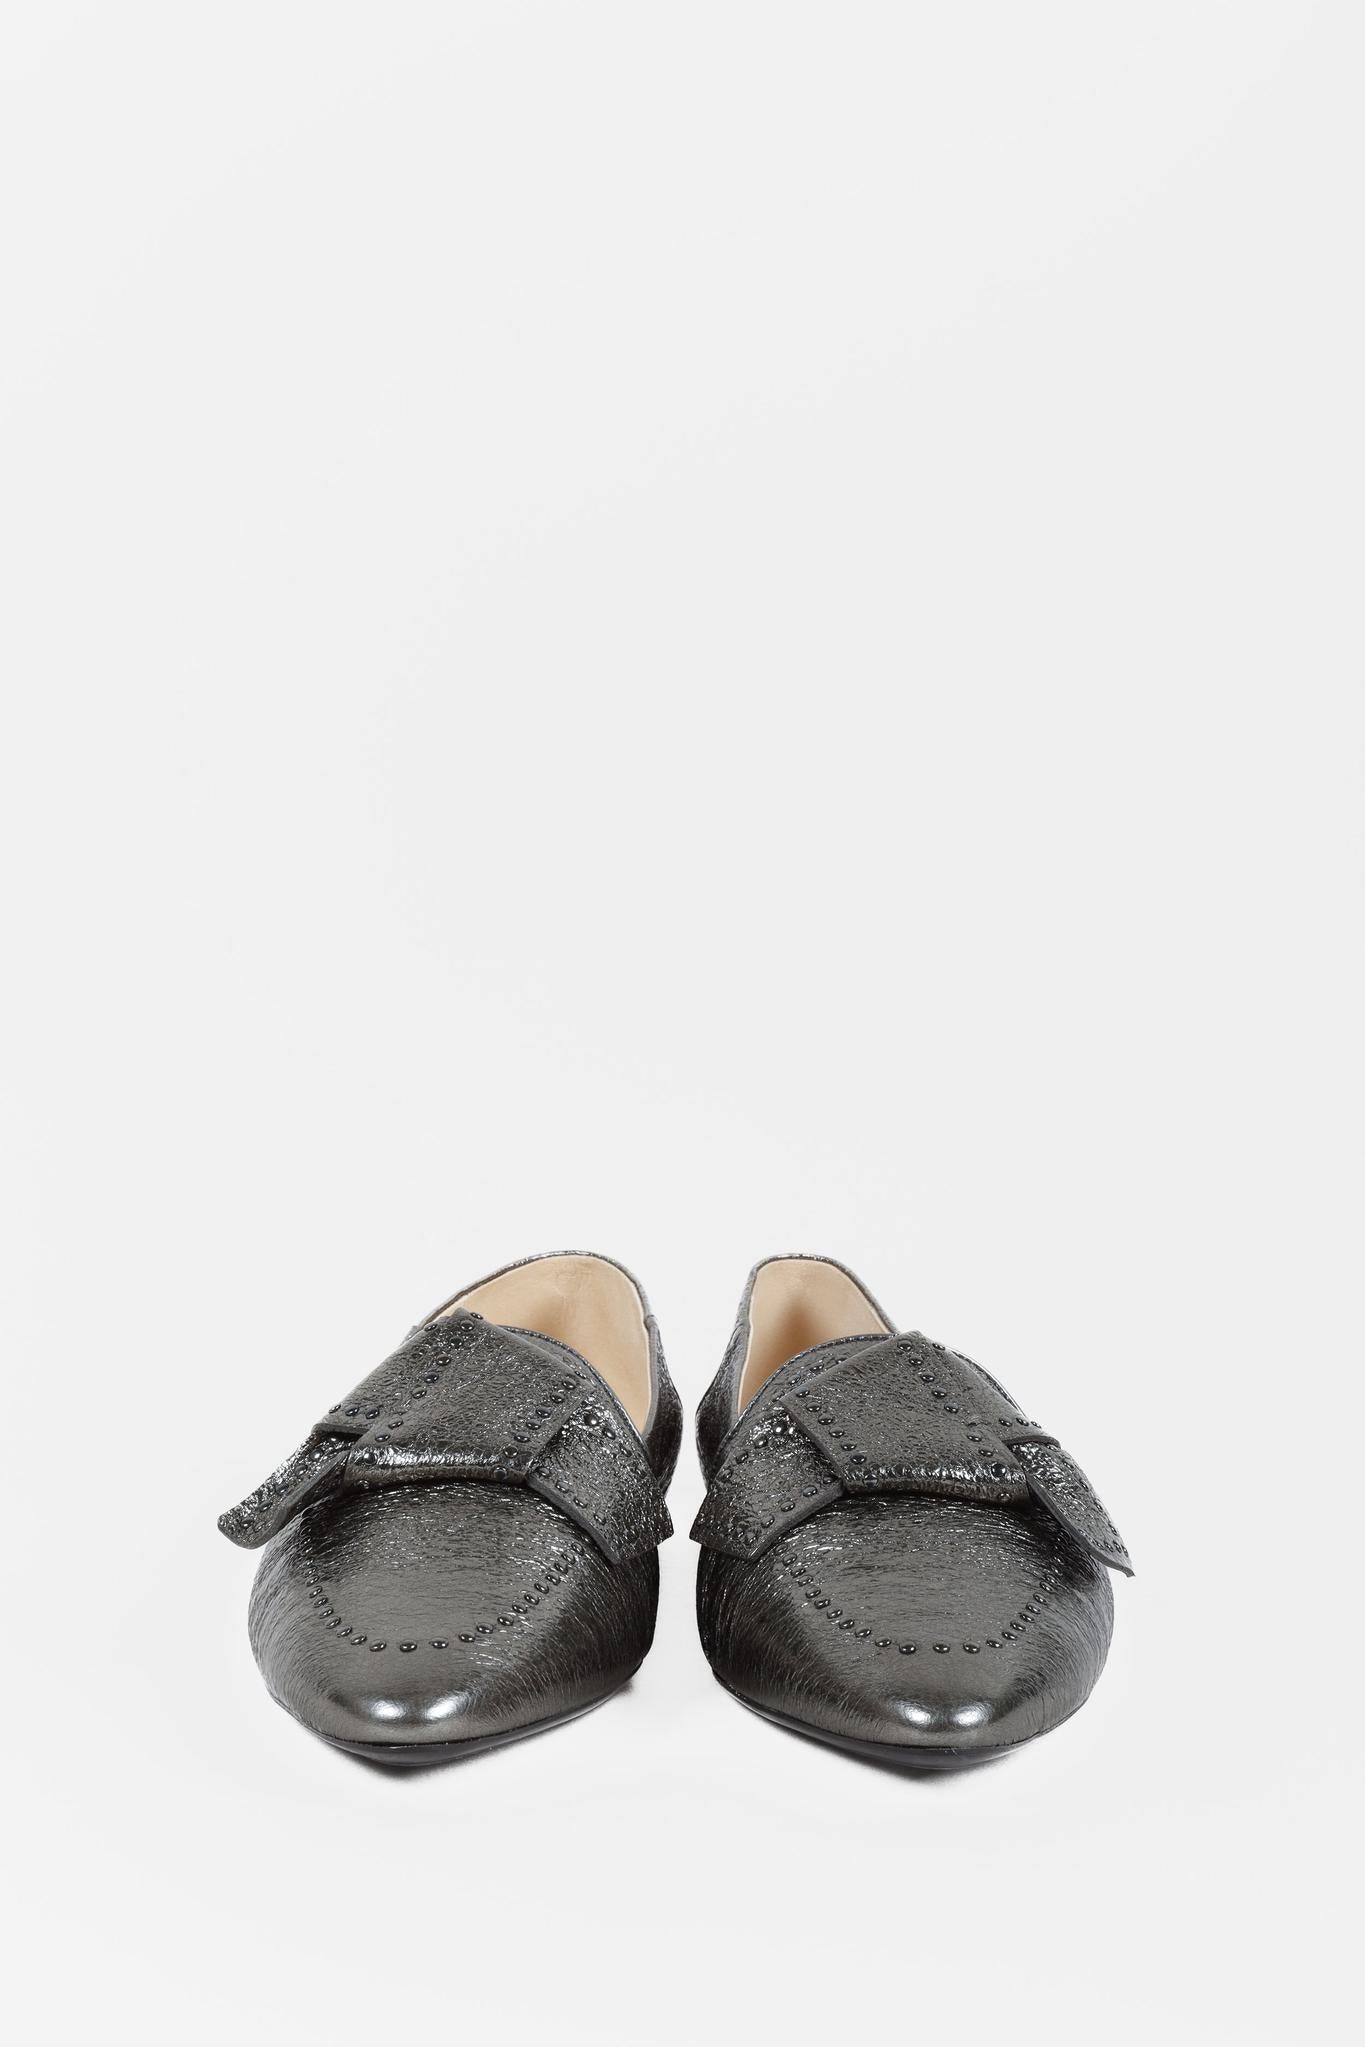 Tod's Metallic Leather Studded Bow Ballet Flats